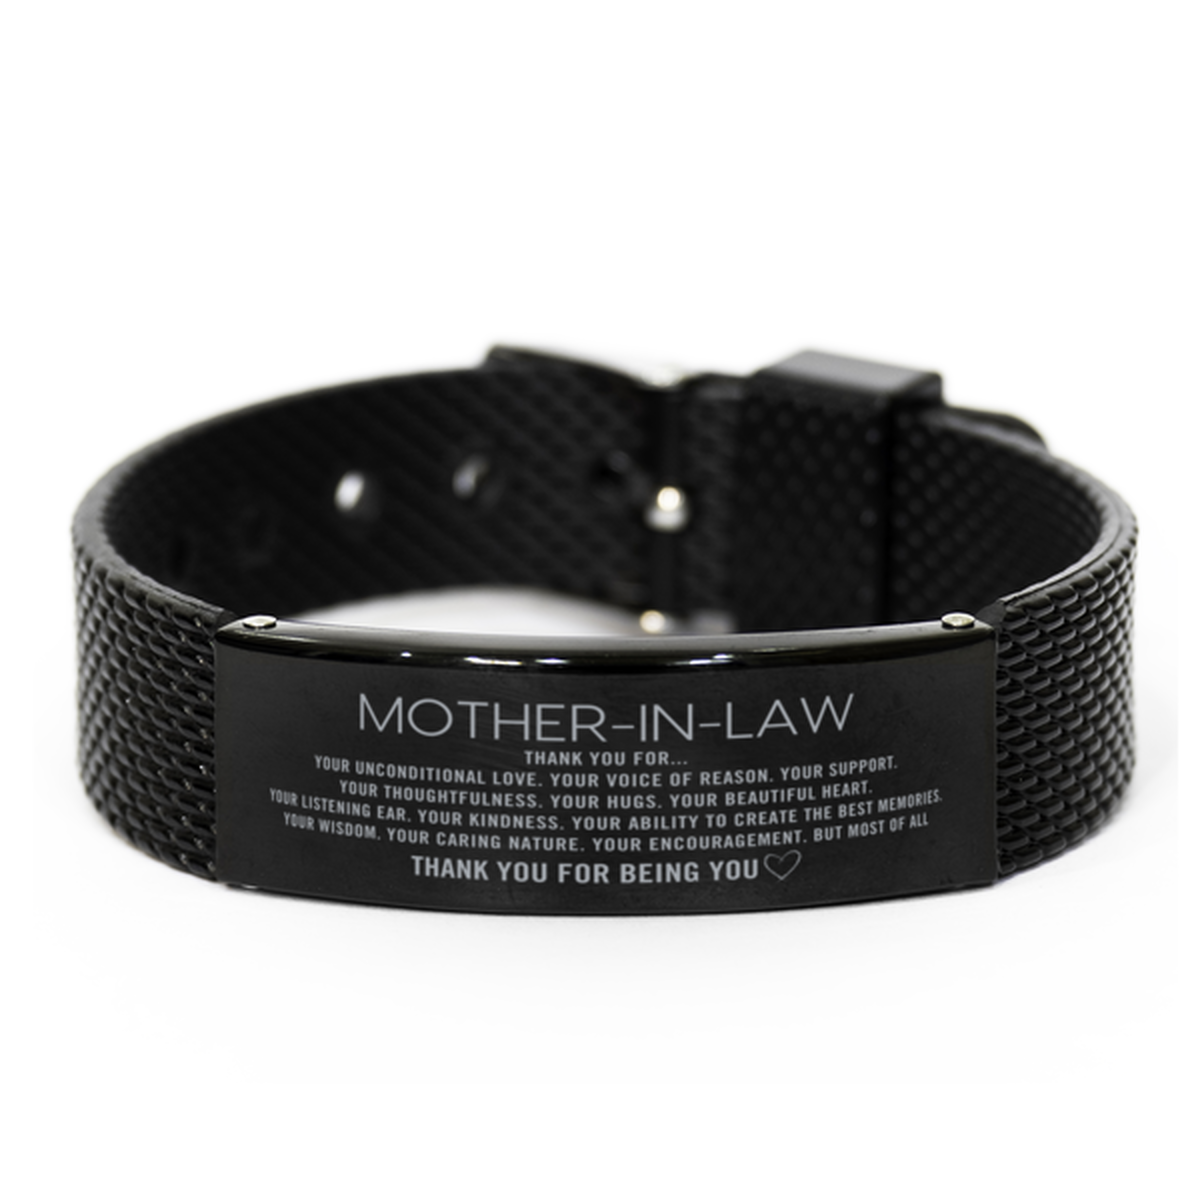 Mother-In-Law Black Shark Mesh Bracelet Custom, Engraved Gifts For Mother-In-Law Christmas Graduation Birthday Gifts for Men Women Mother-In-Law Thank you for Your unconditional love